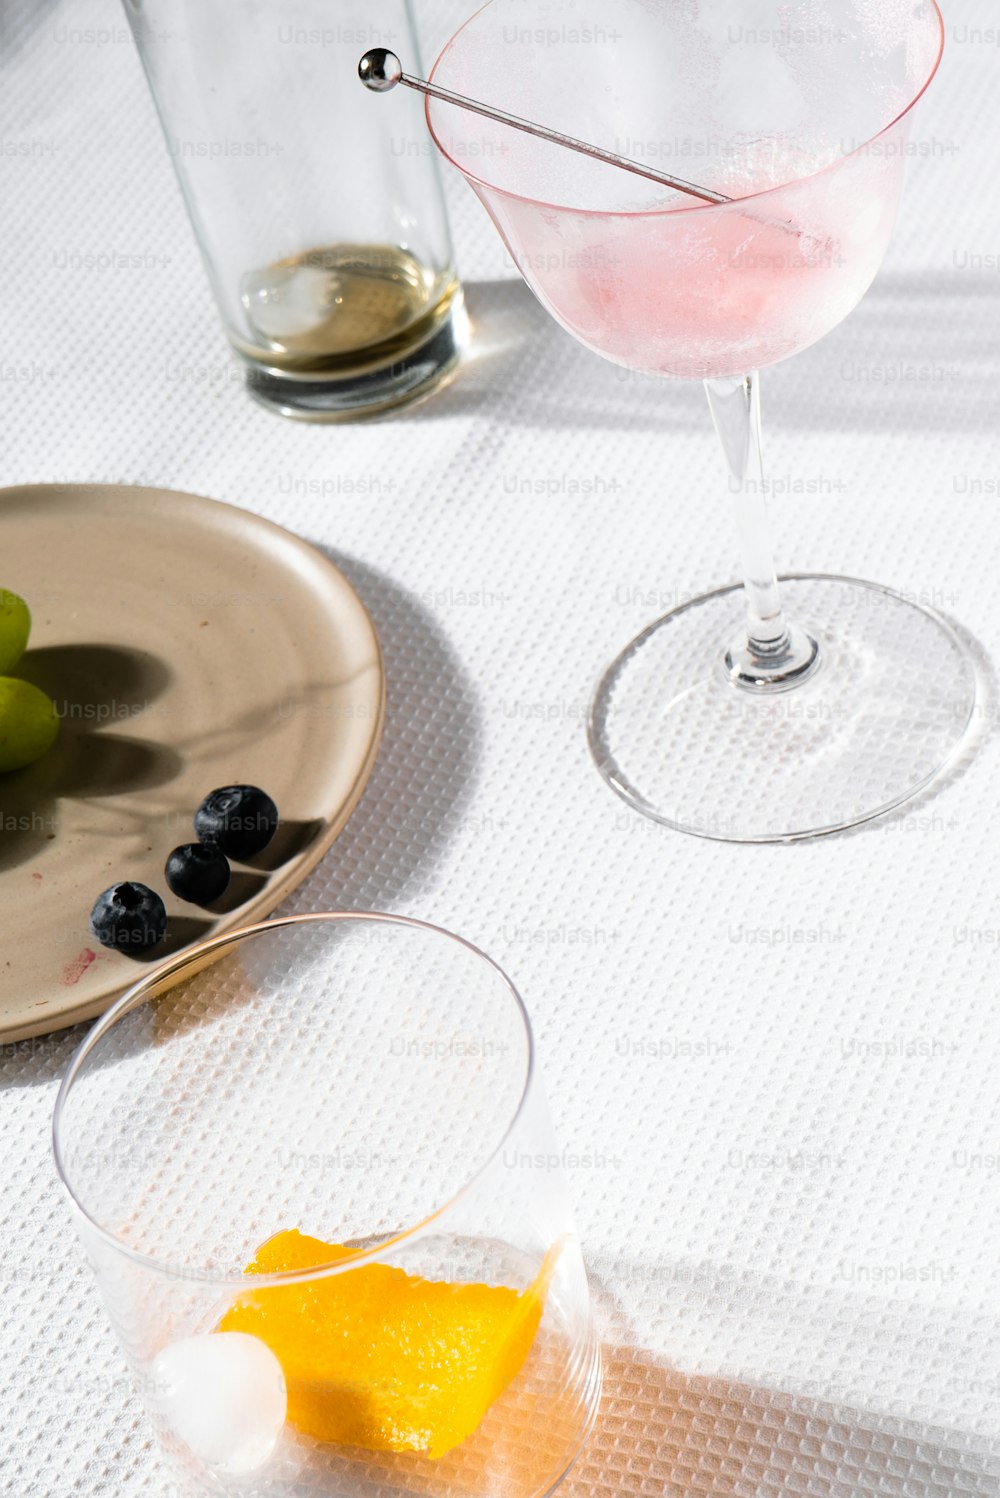 a glass of wine and a plate of grapes on a table